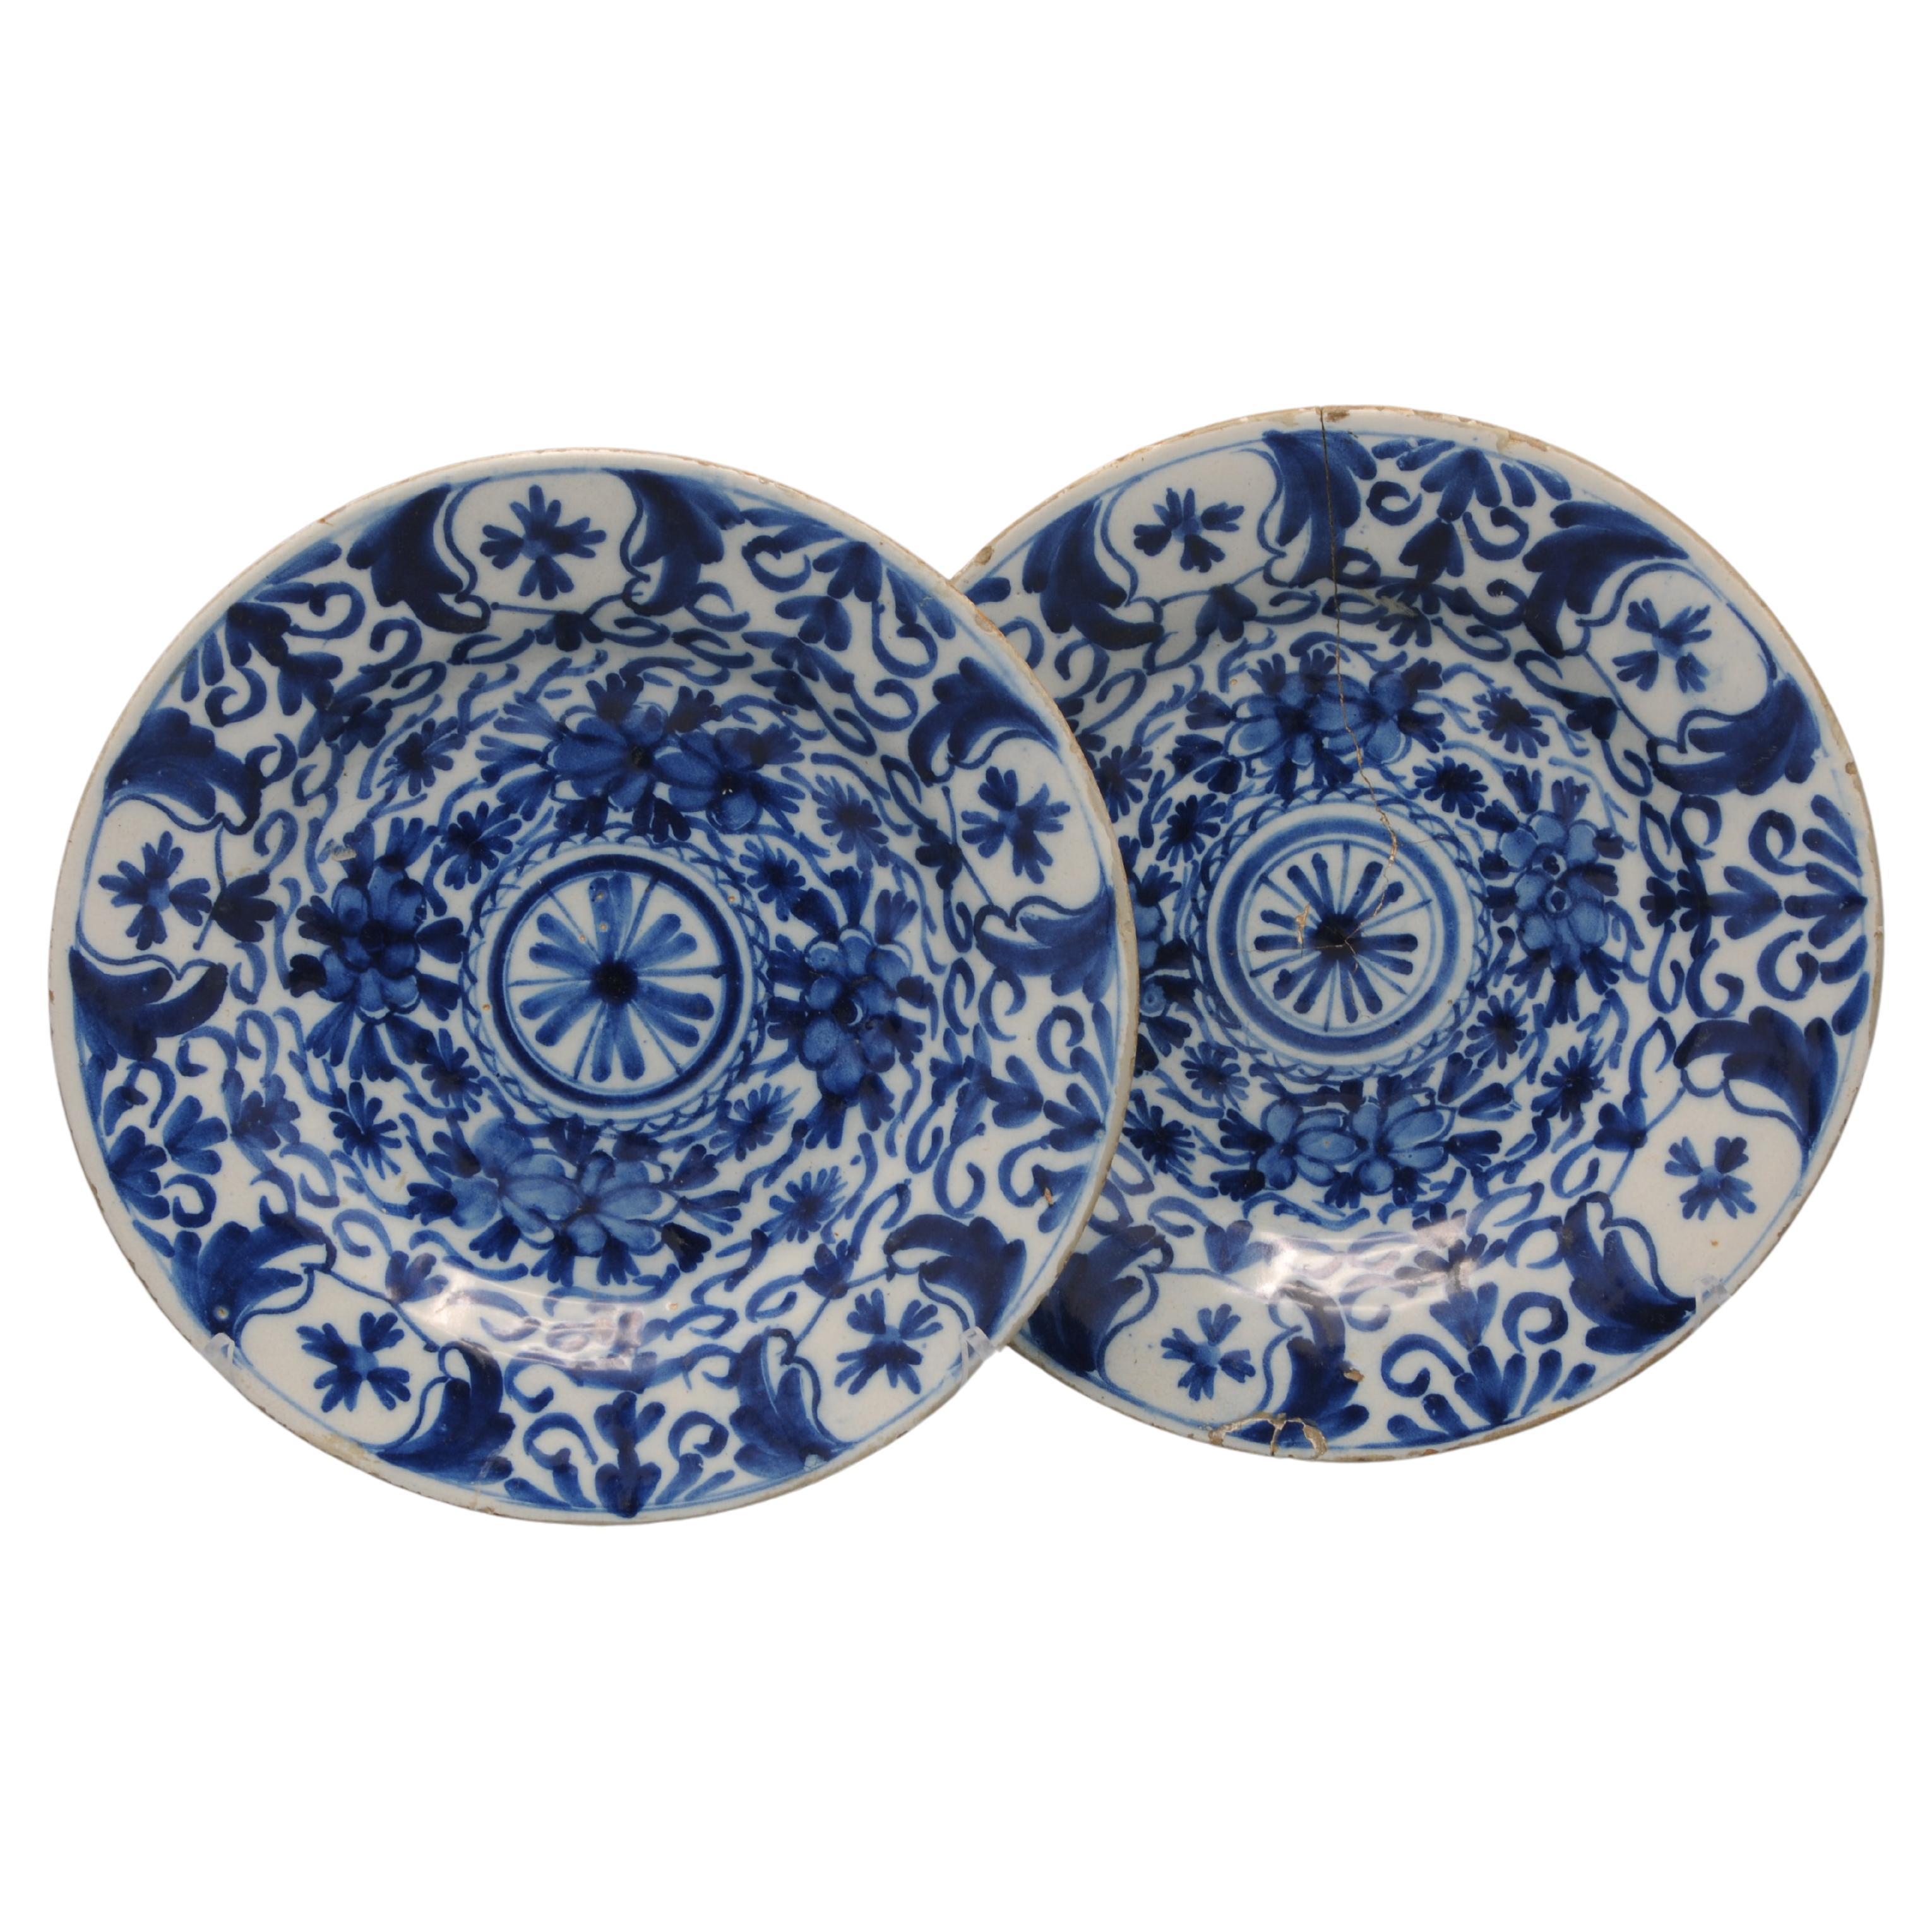 Delft - Pair of plates - Late 18th century  For Sale